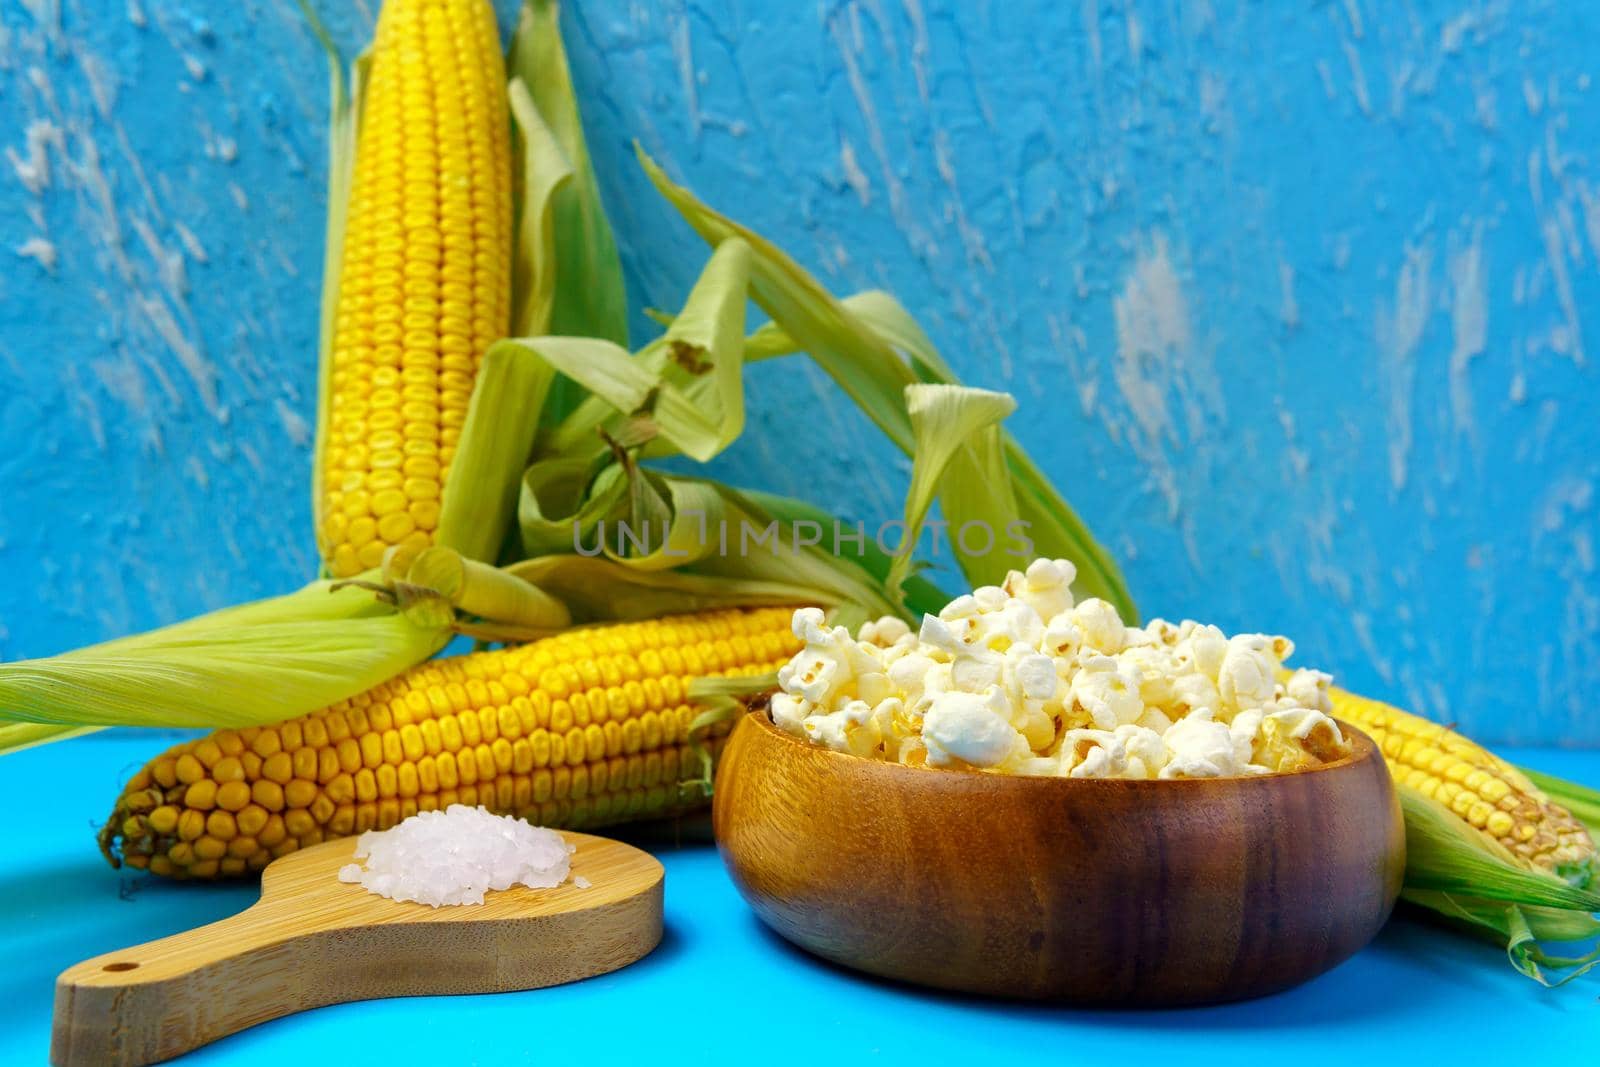 Corn on the cob, popcorn on a blue background. Topic - agro, corn cultivation, harvest.